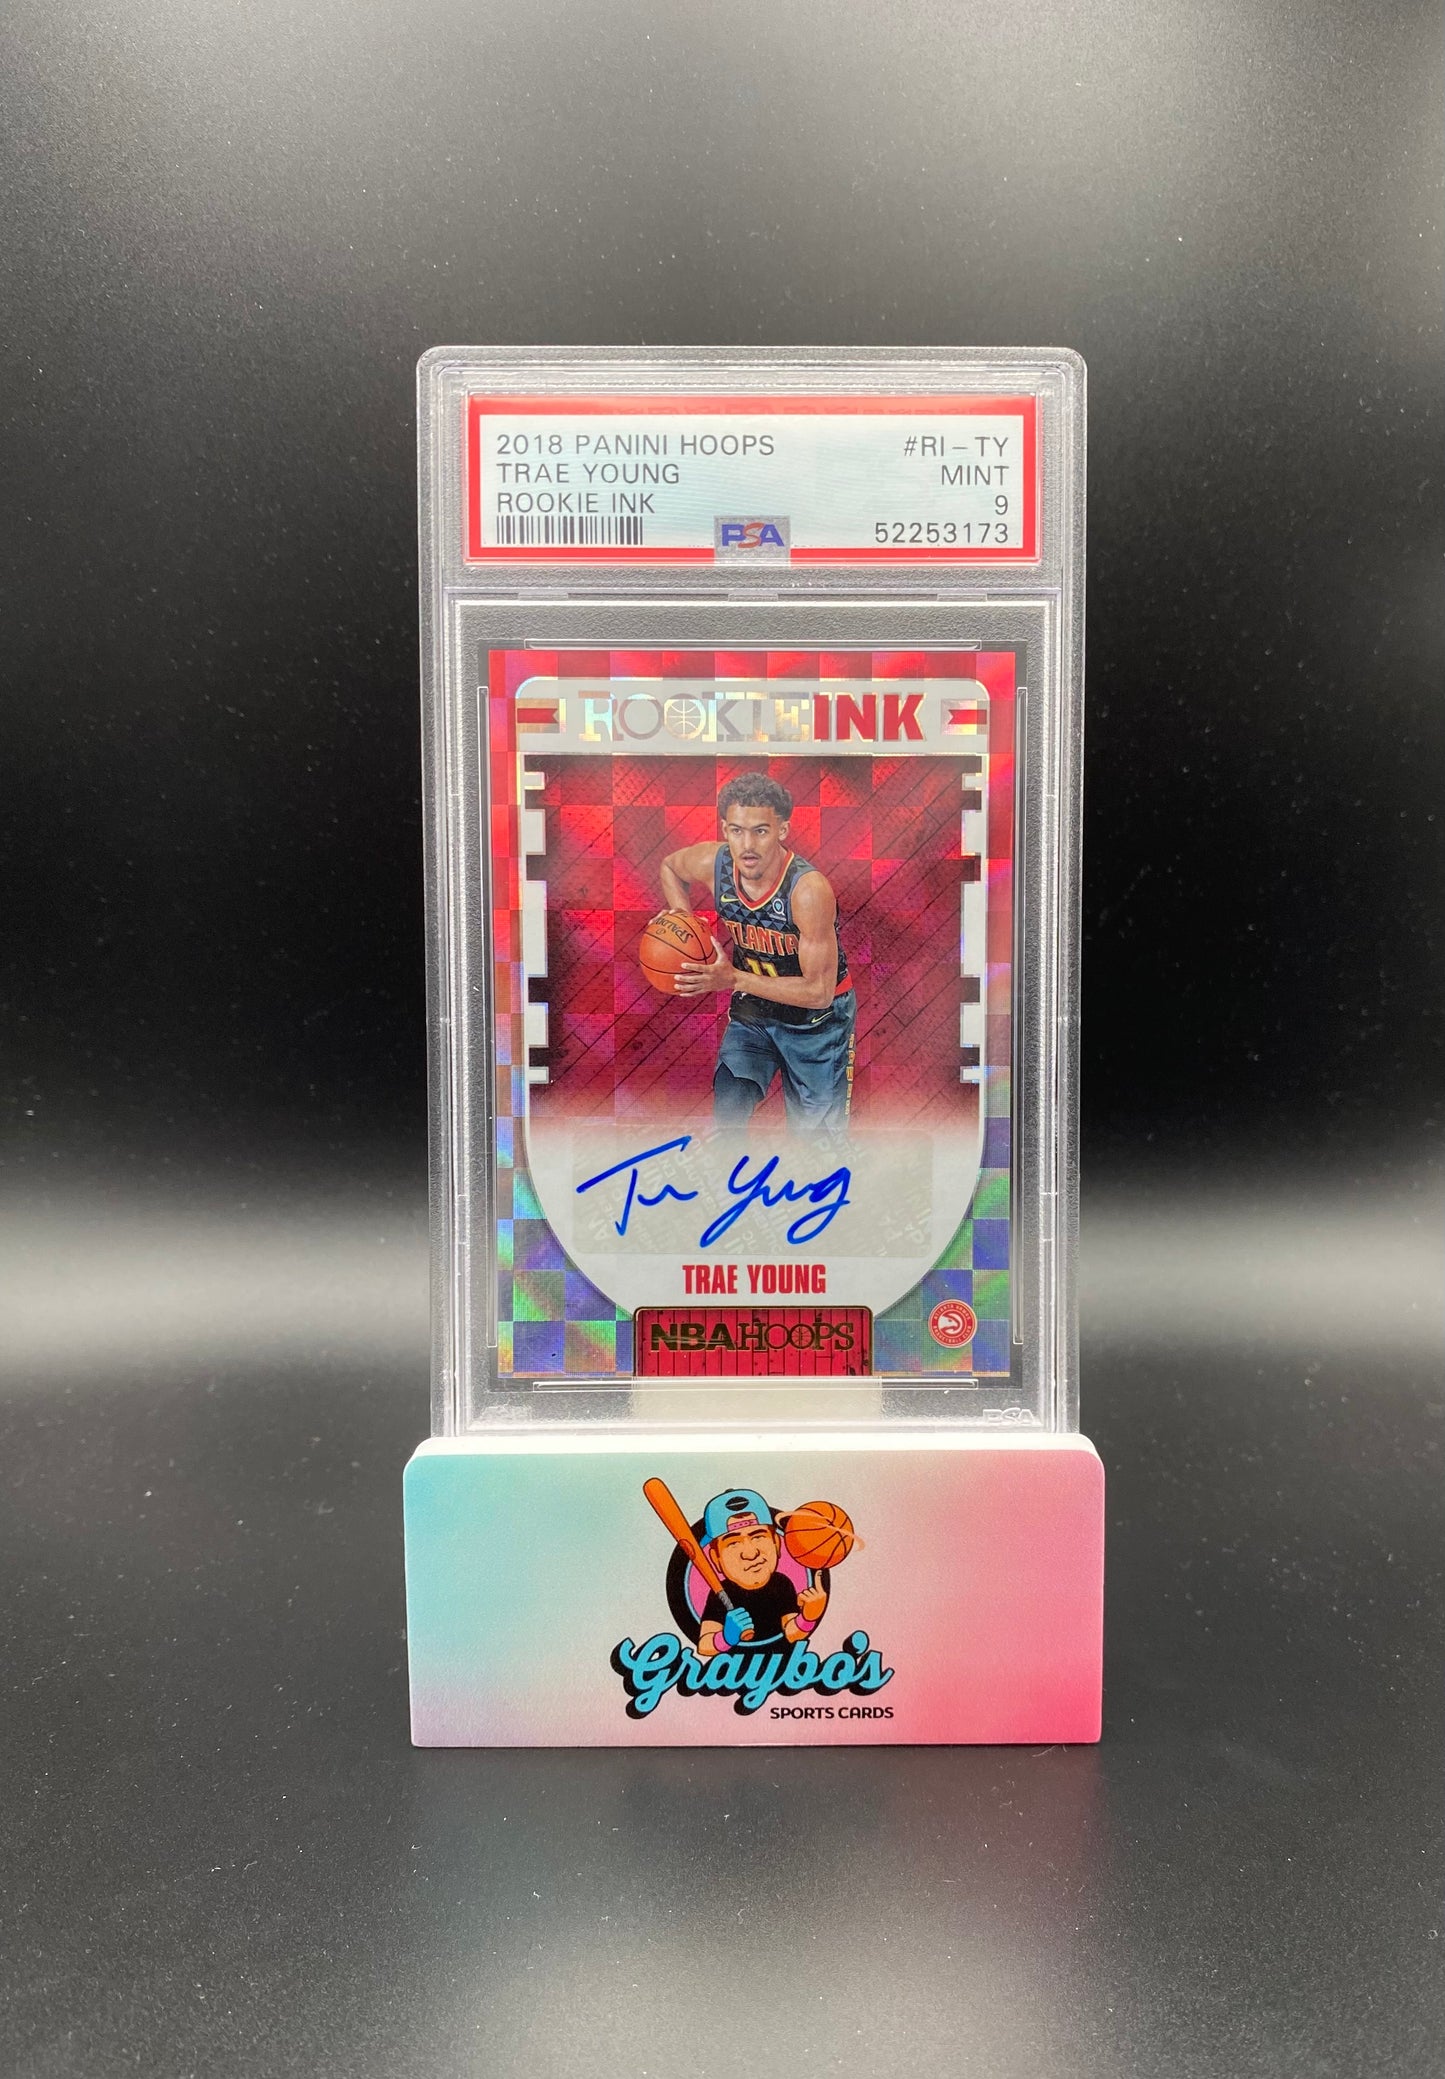 2018 Panini Hoops Trae Young Rookie Ink PSA 9